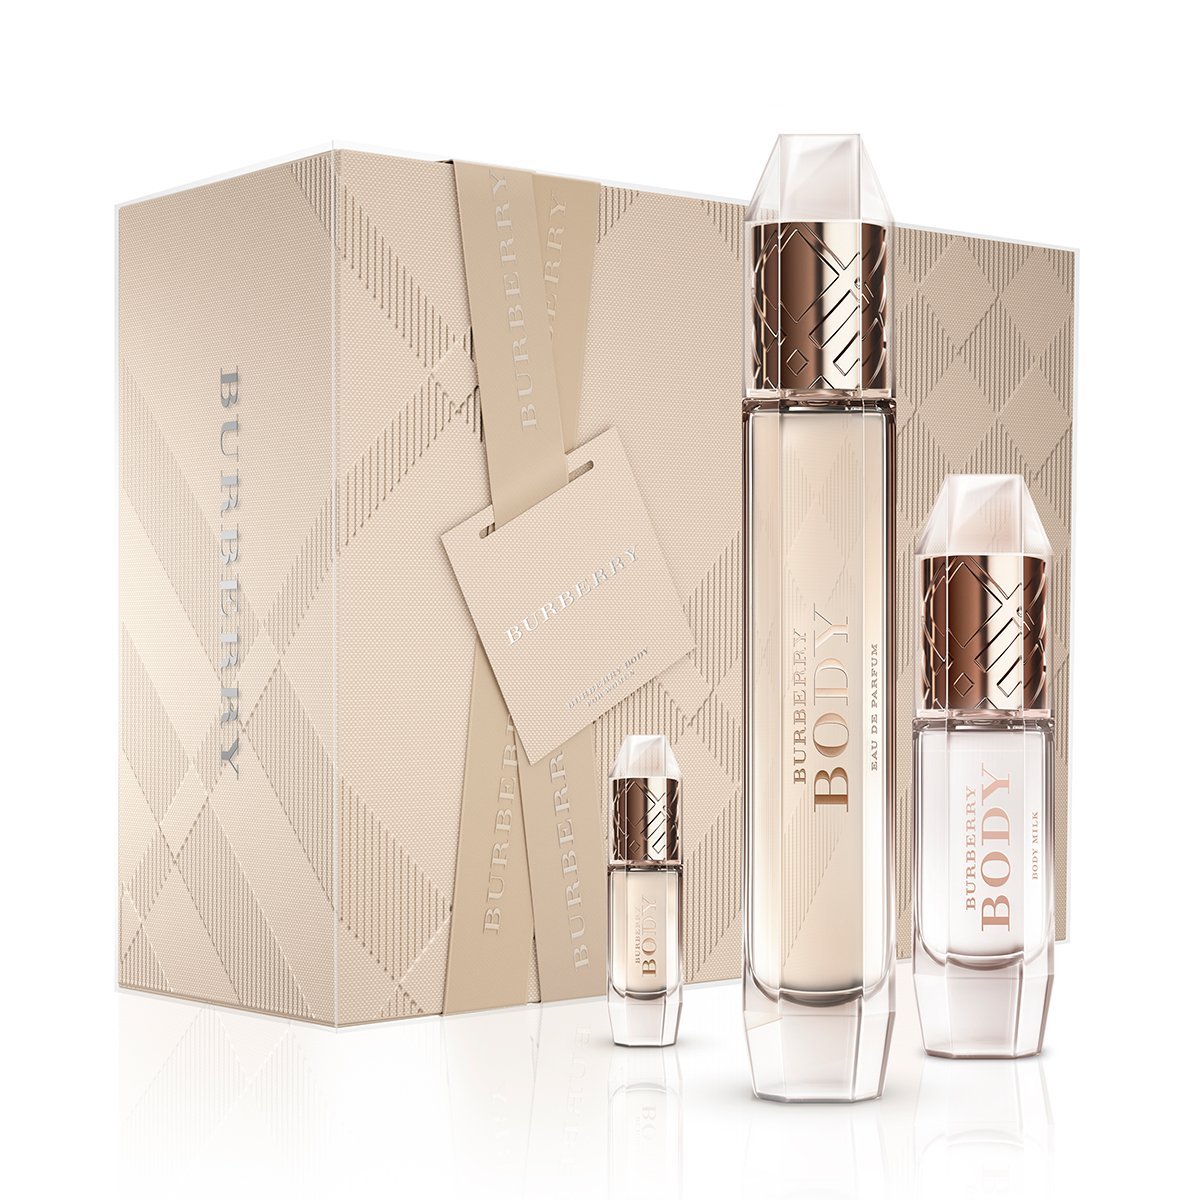 BURBERRY Body Gift Set | What Should I 